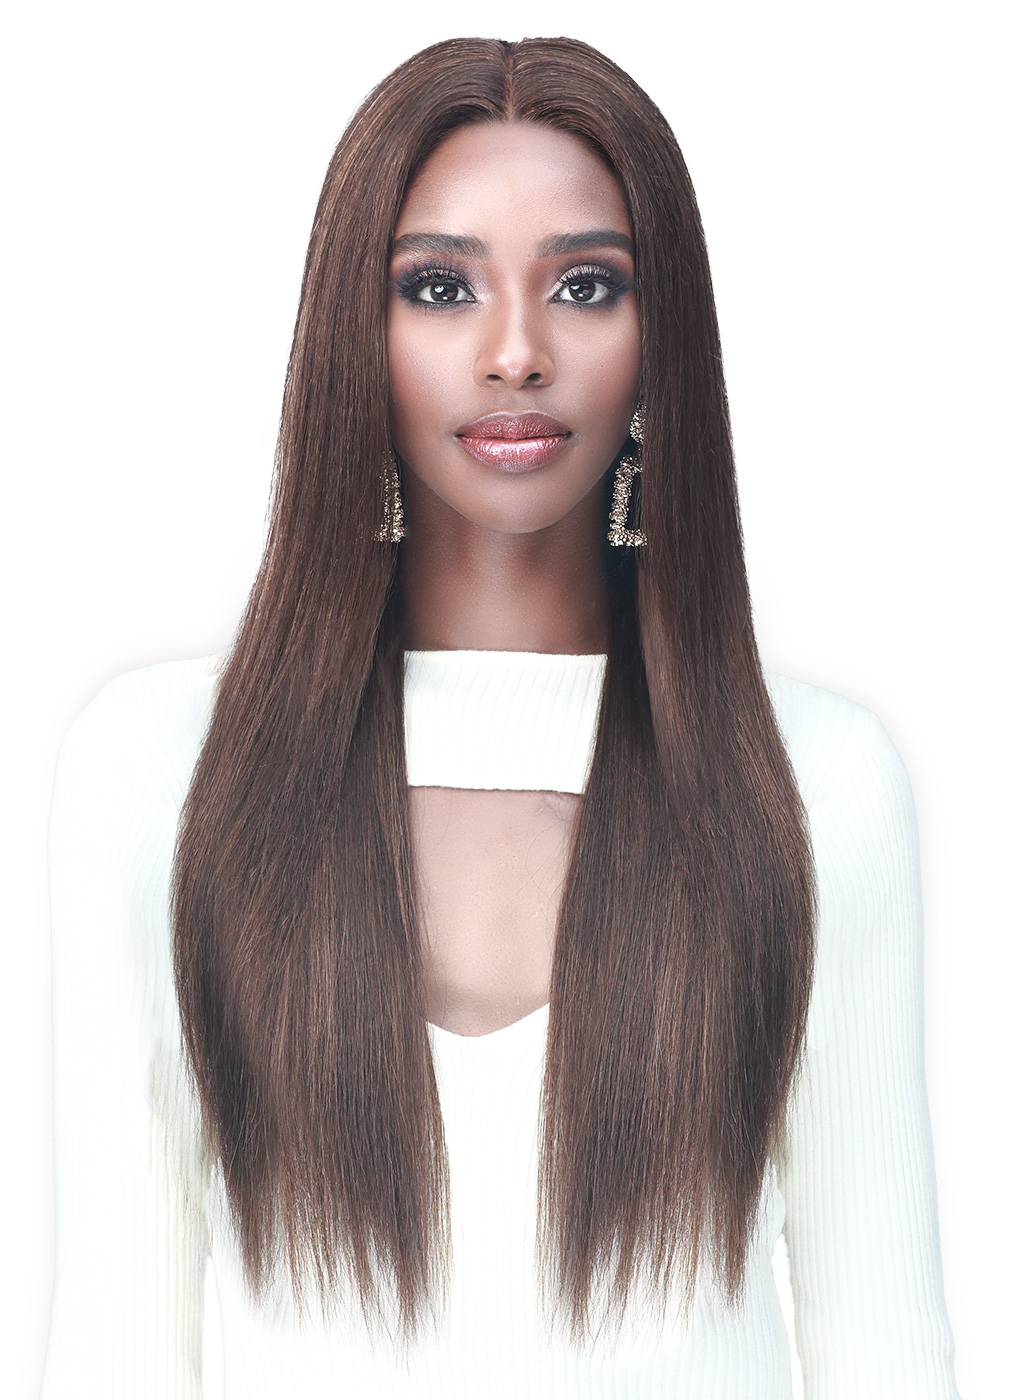 MHLF911 NATURAL PERM STRAIGHT 26" (13"X4")